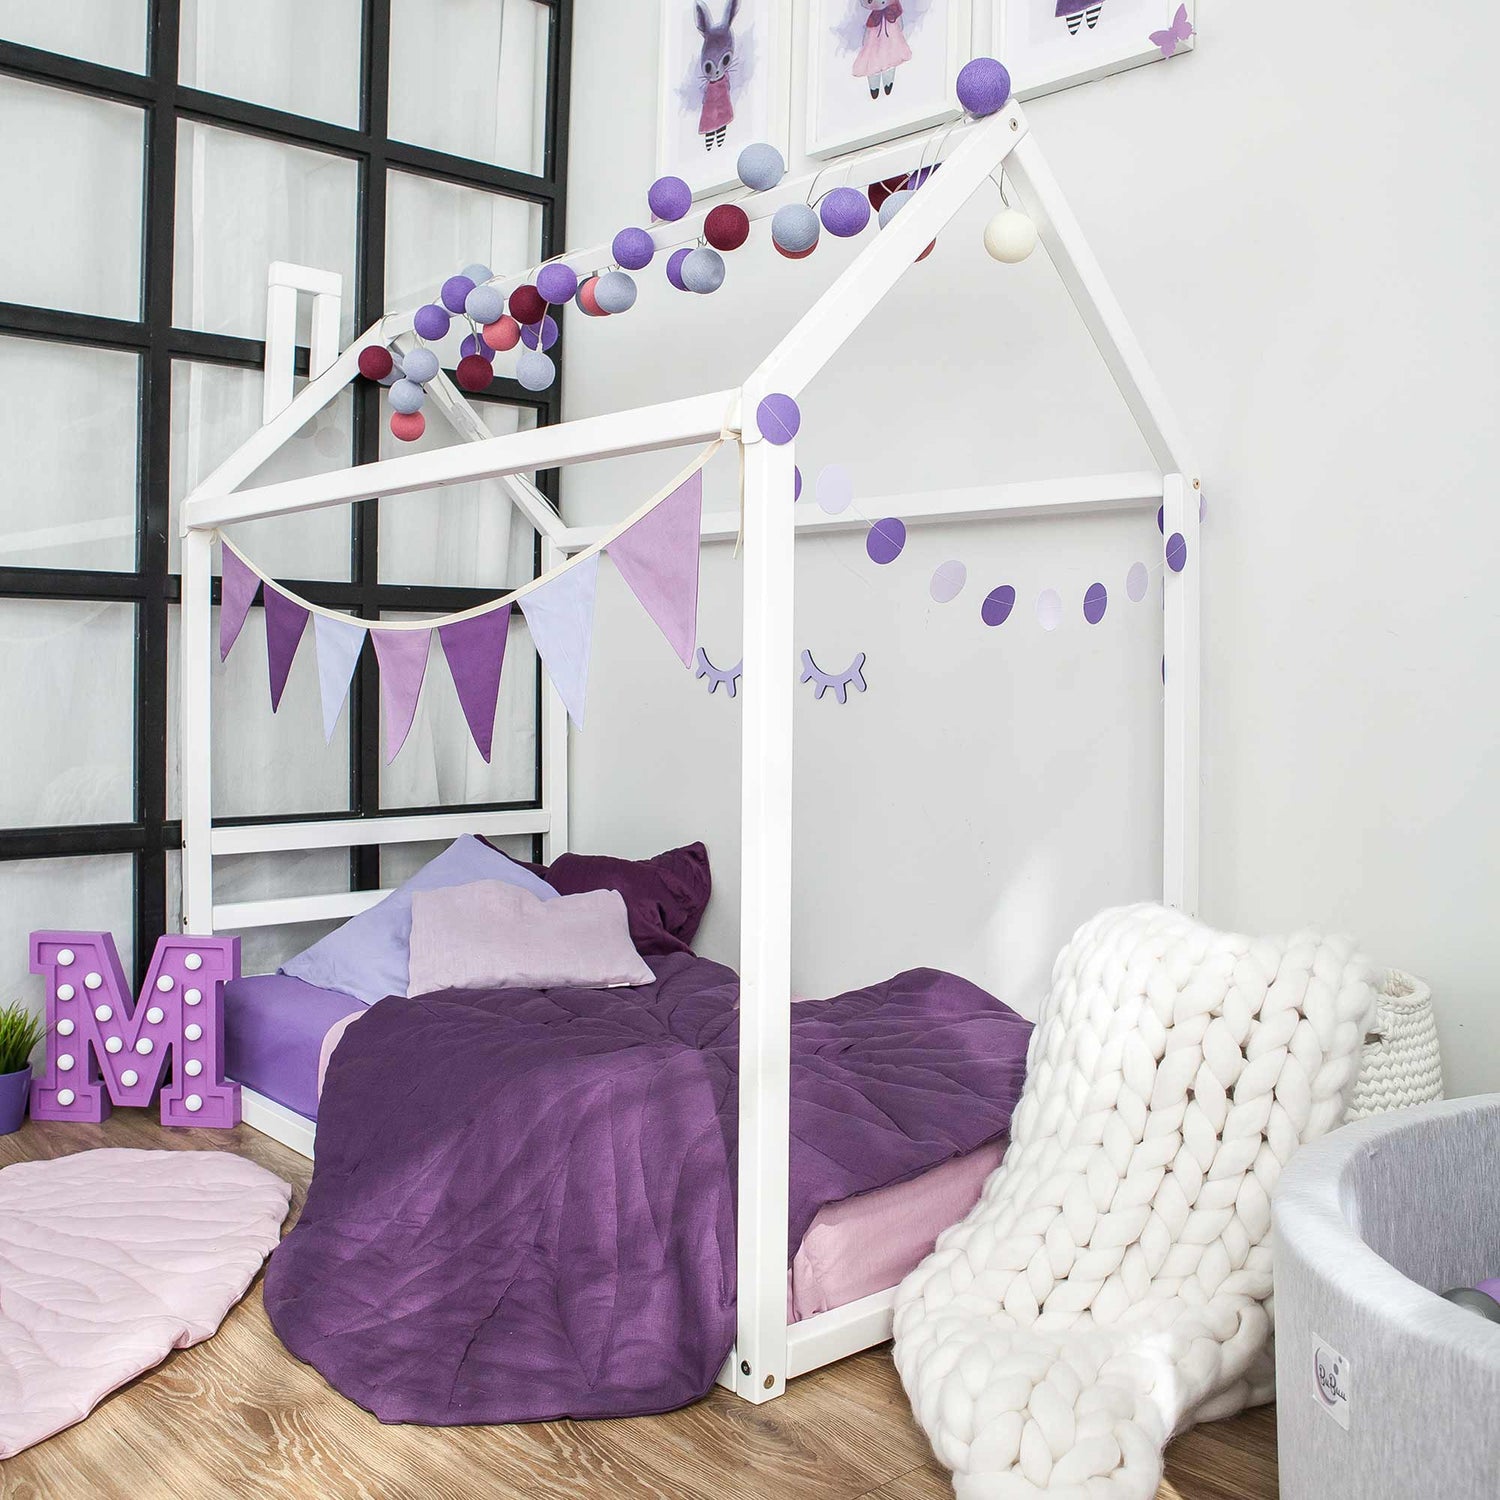 A girl's room with a purple and white bed.